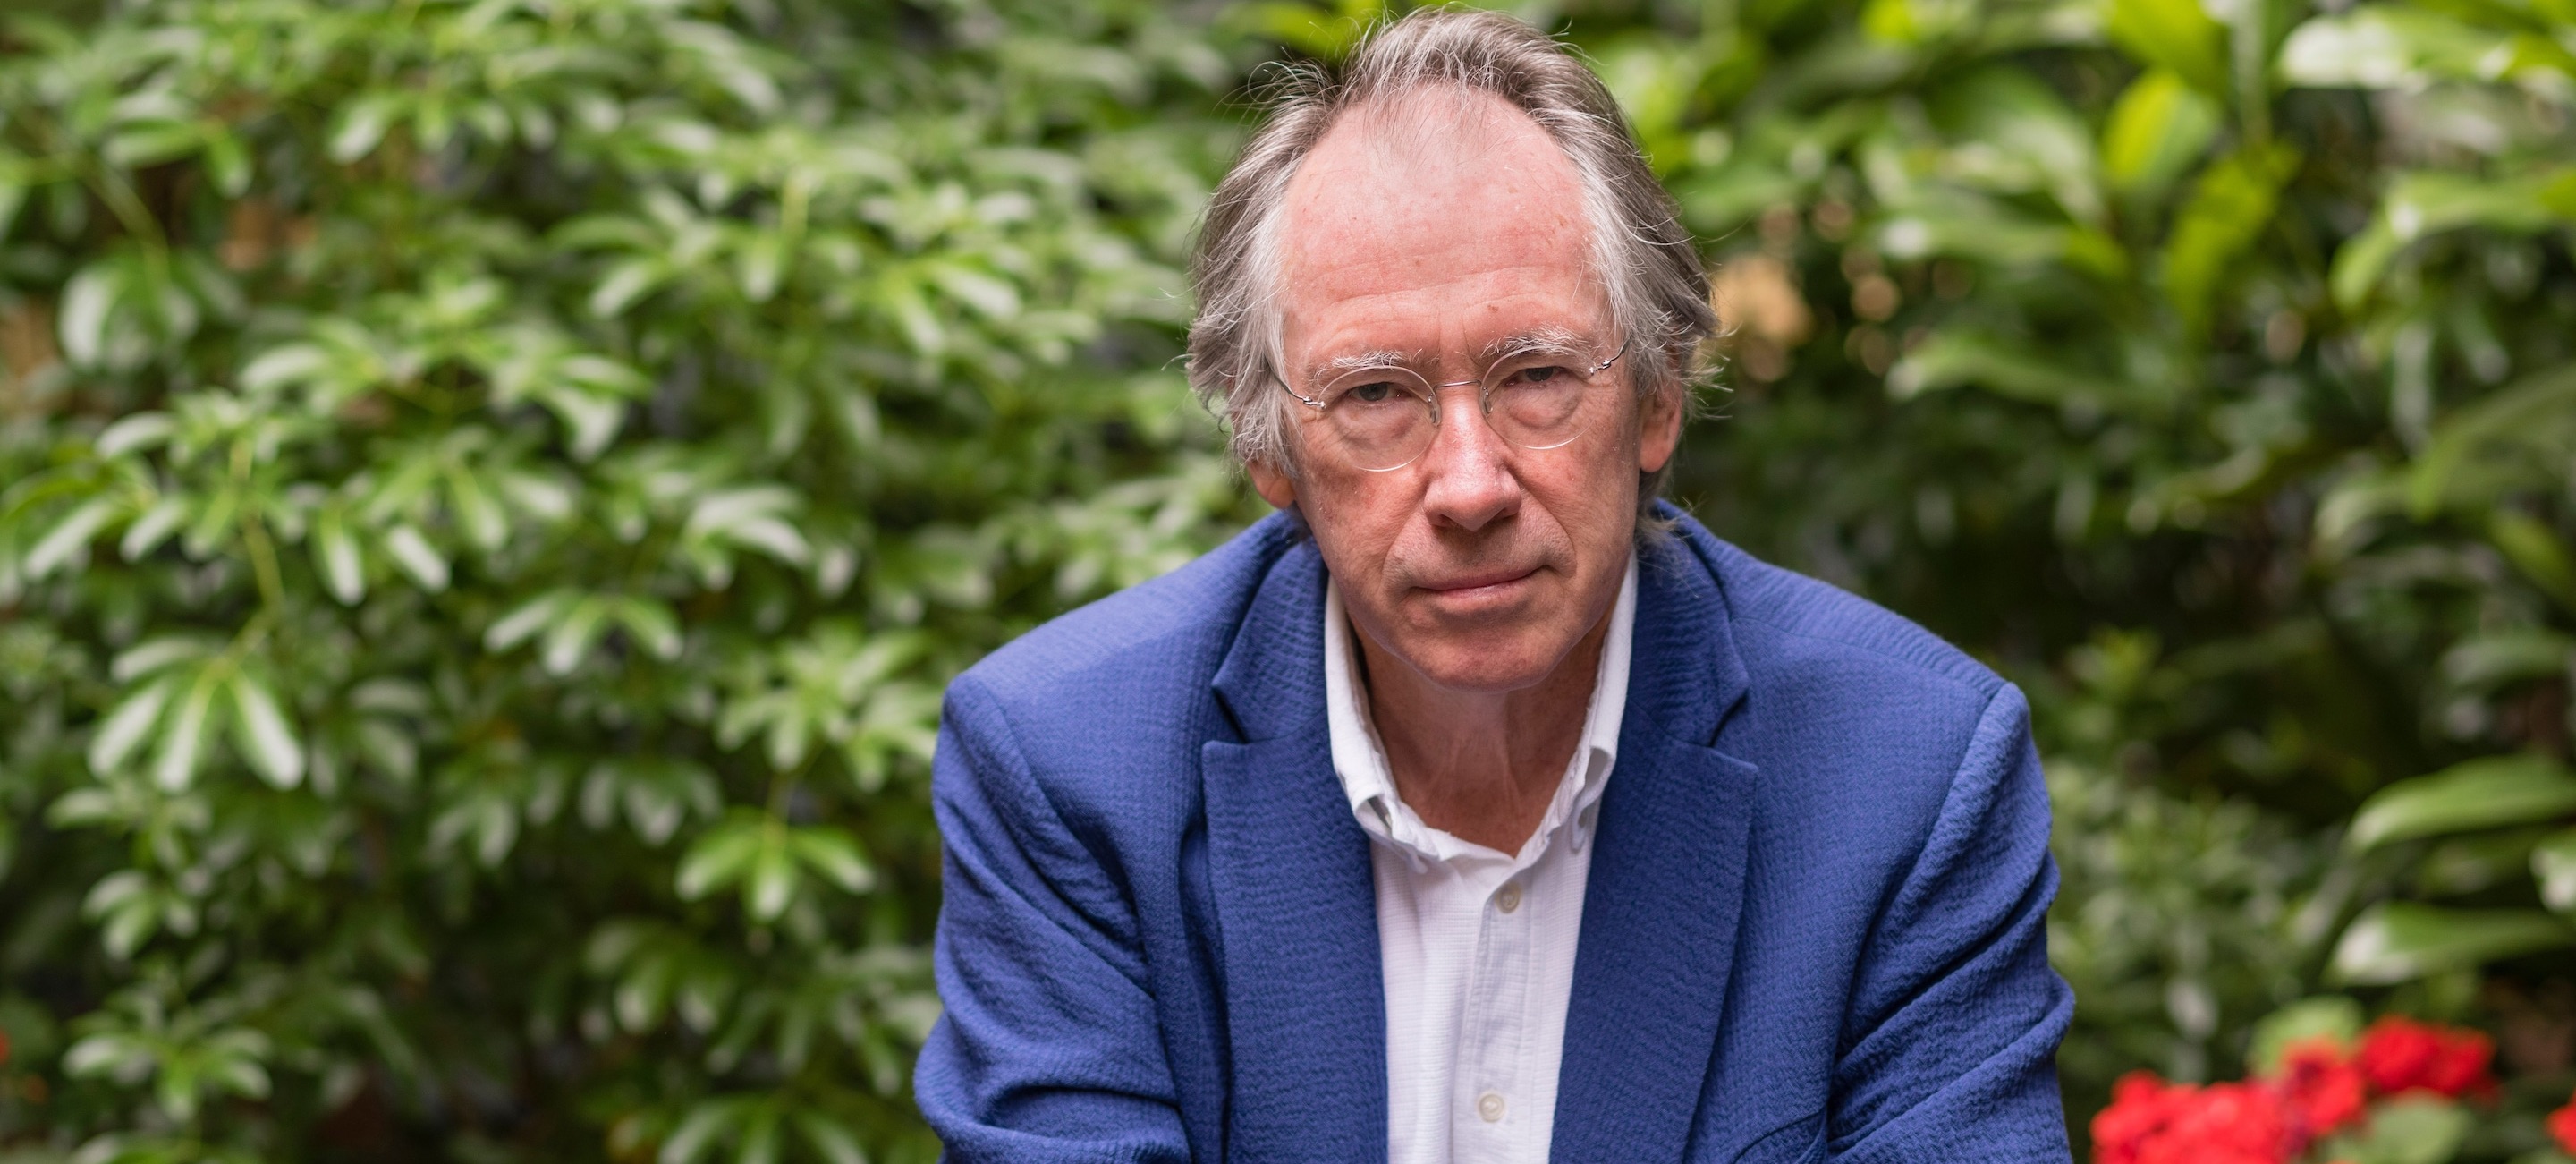 Author Ian McEwan says there is a crisis of freedom of expression